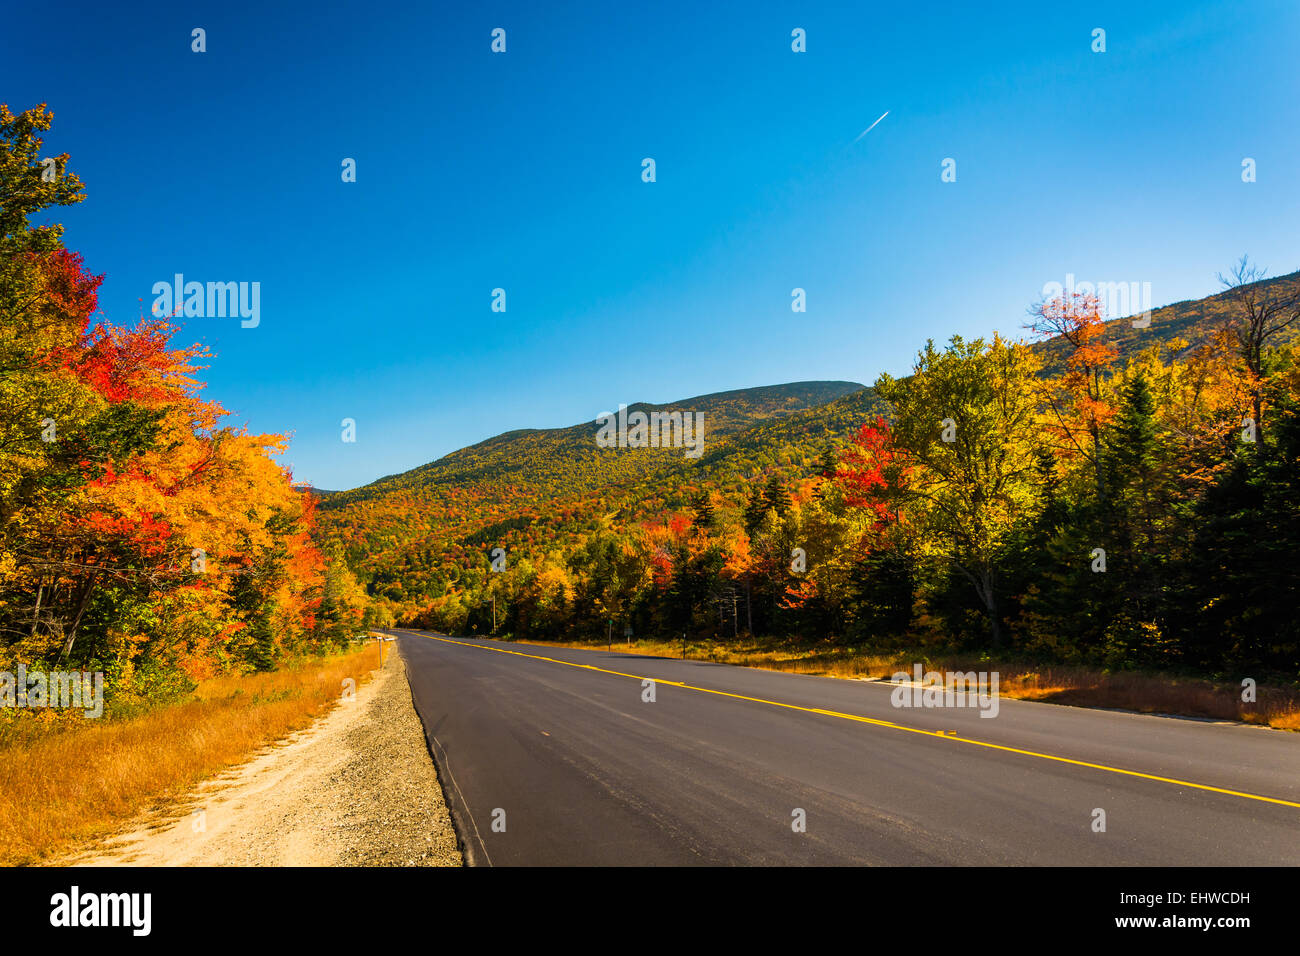 Autumn color along a road in White Mountain National Forest, New Hampshire. Stock Photo